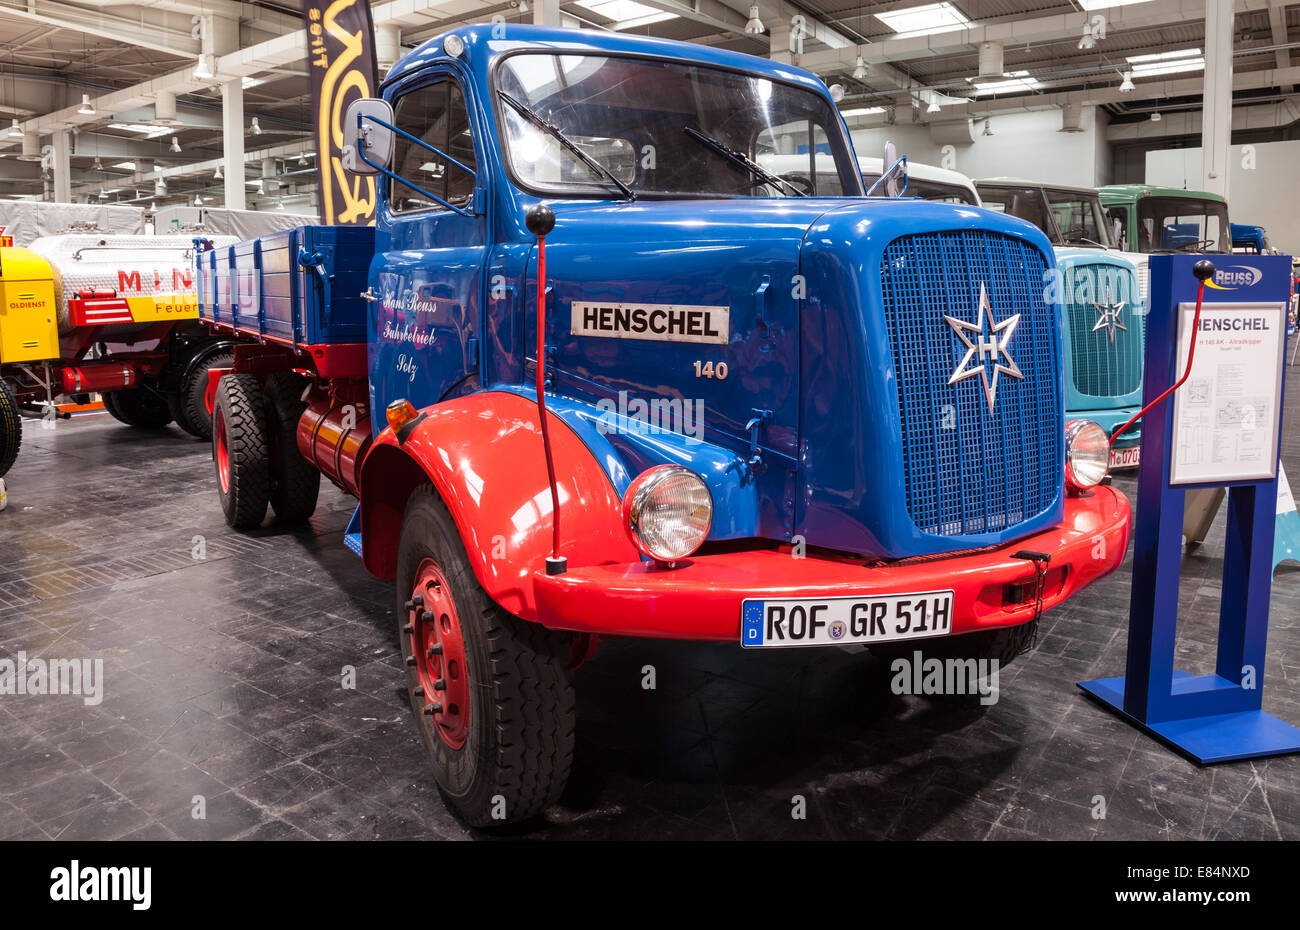 Historic HANOMAG HENSCHEL 140 truck  from 1960 at the 65th IAA Commercial Vehicles Fair 2014 in Hannover, Germany Stock Photo